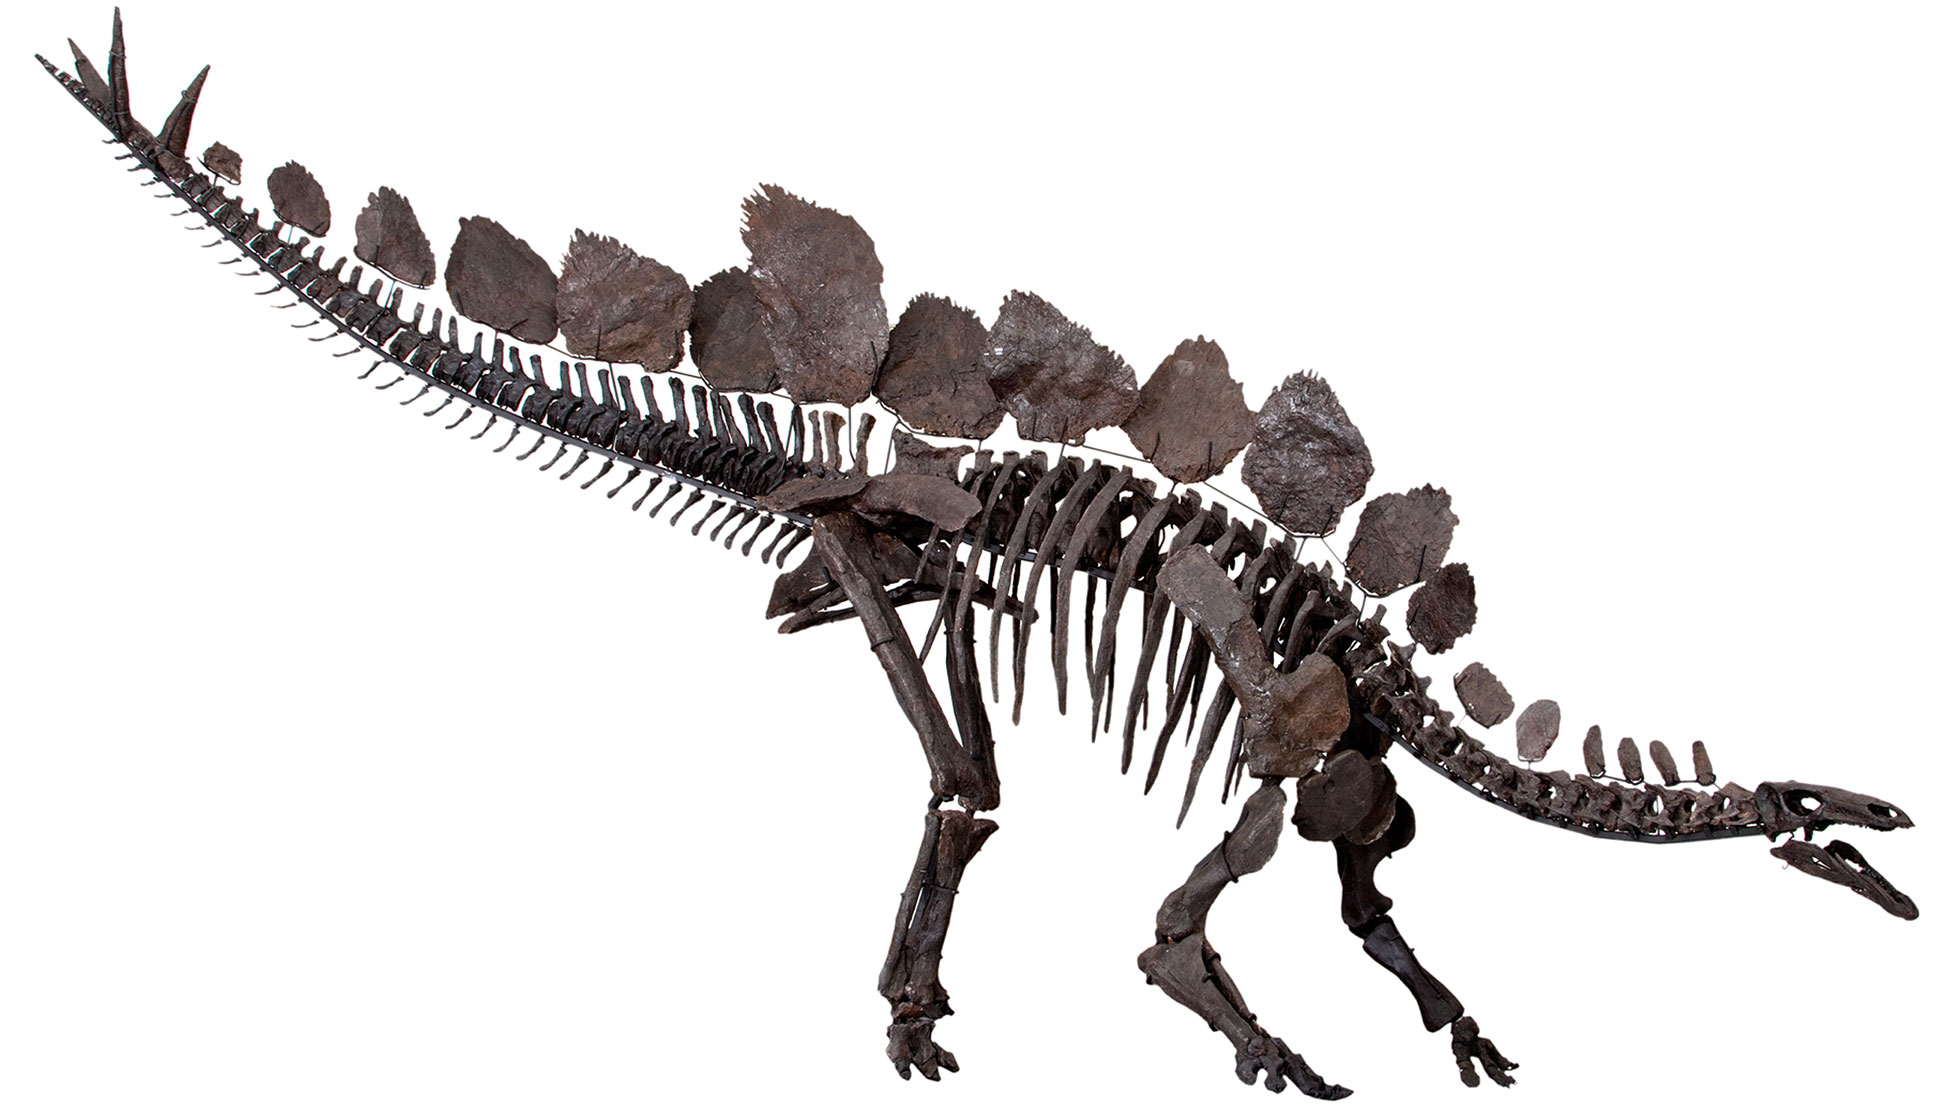 Photograph of a  mounted skeleton Stegosaurus stenops, a herbivorous dinosaur from the Morrison Formation of Wyoming. The a dinosaur skeleton standing on four legs, with the back legs longer than the front legs. The neck is slightly elongated, and the head is small. The back is armored with a series of large, bony plates that stand straight up in two parallel rows. The tail has large spikes (three can be seen) on its end. 